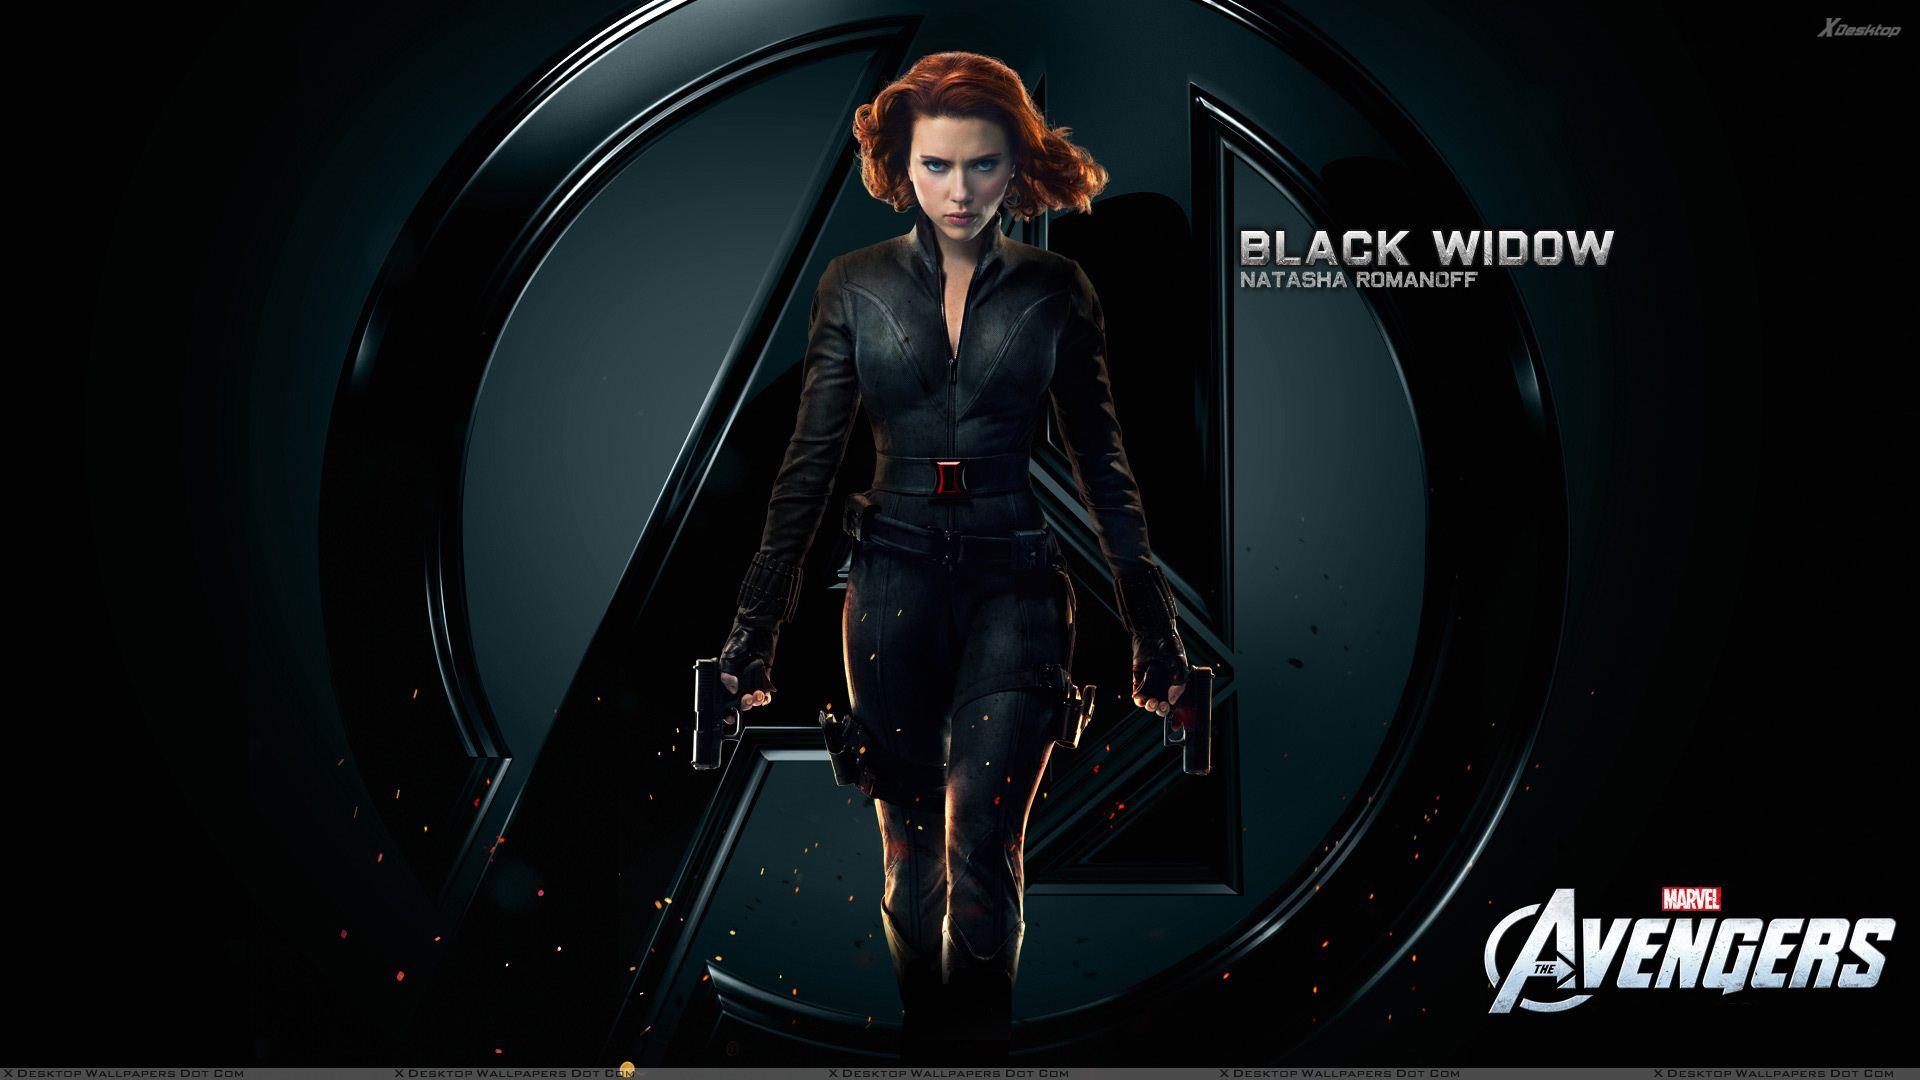 Fan Uses Iconic Comic Cover to Create Awesome Black Widow Movie